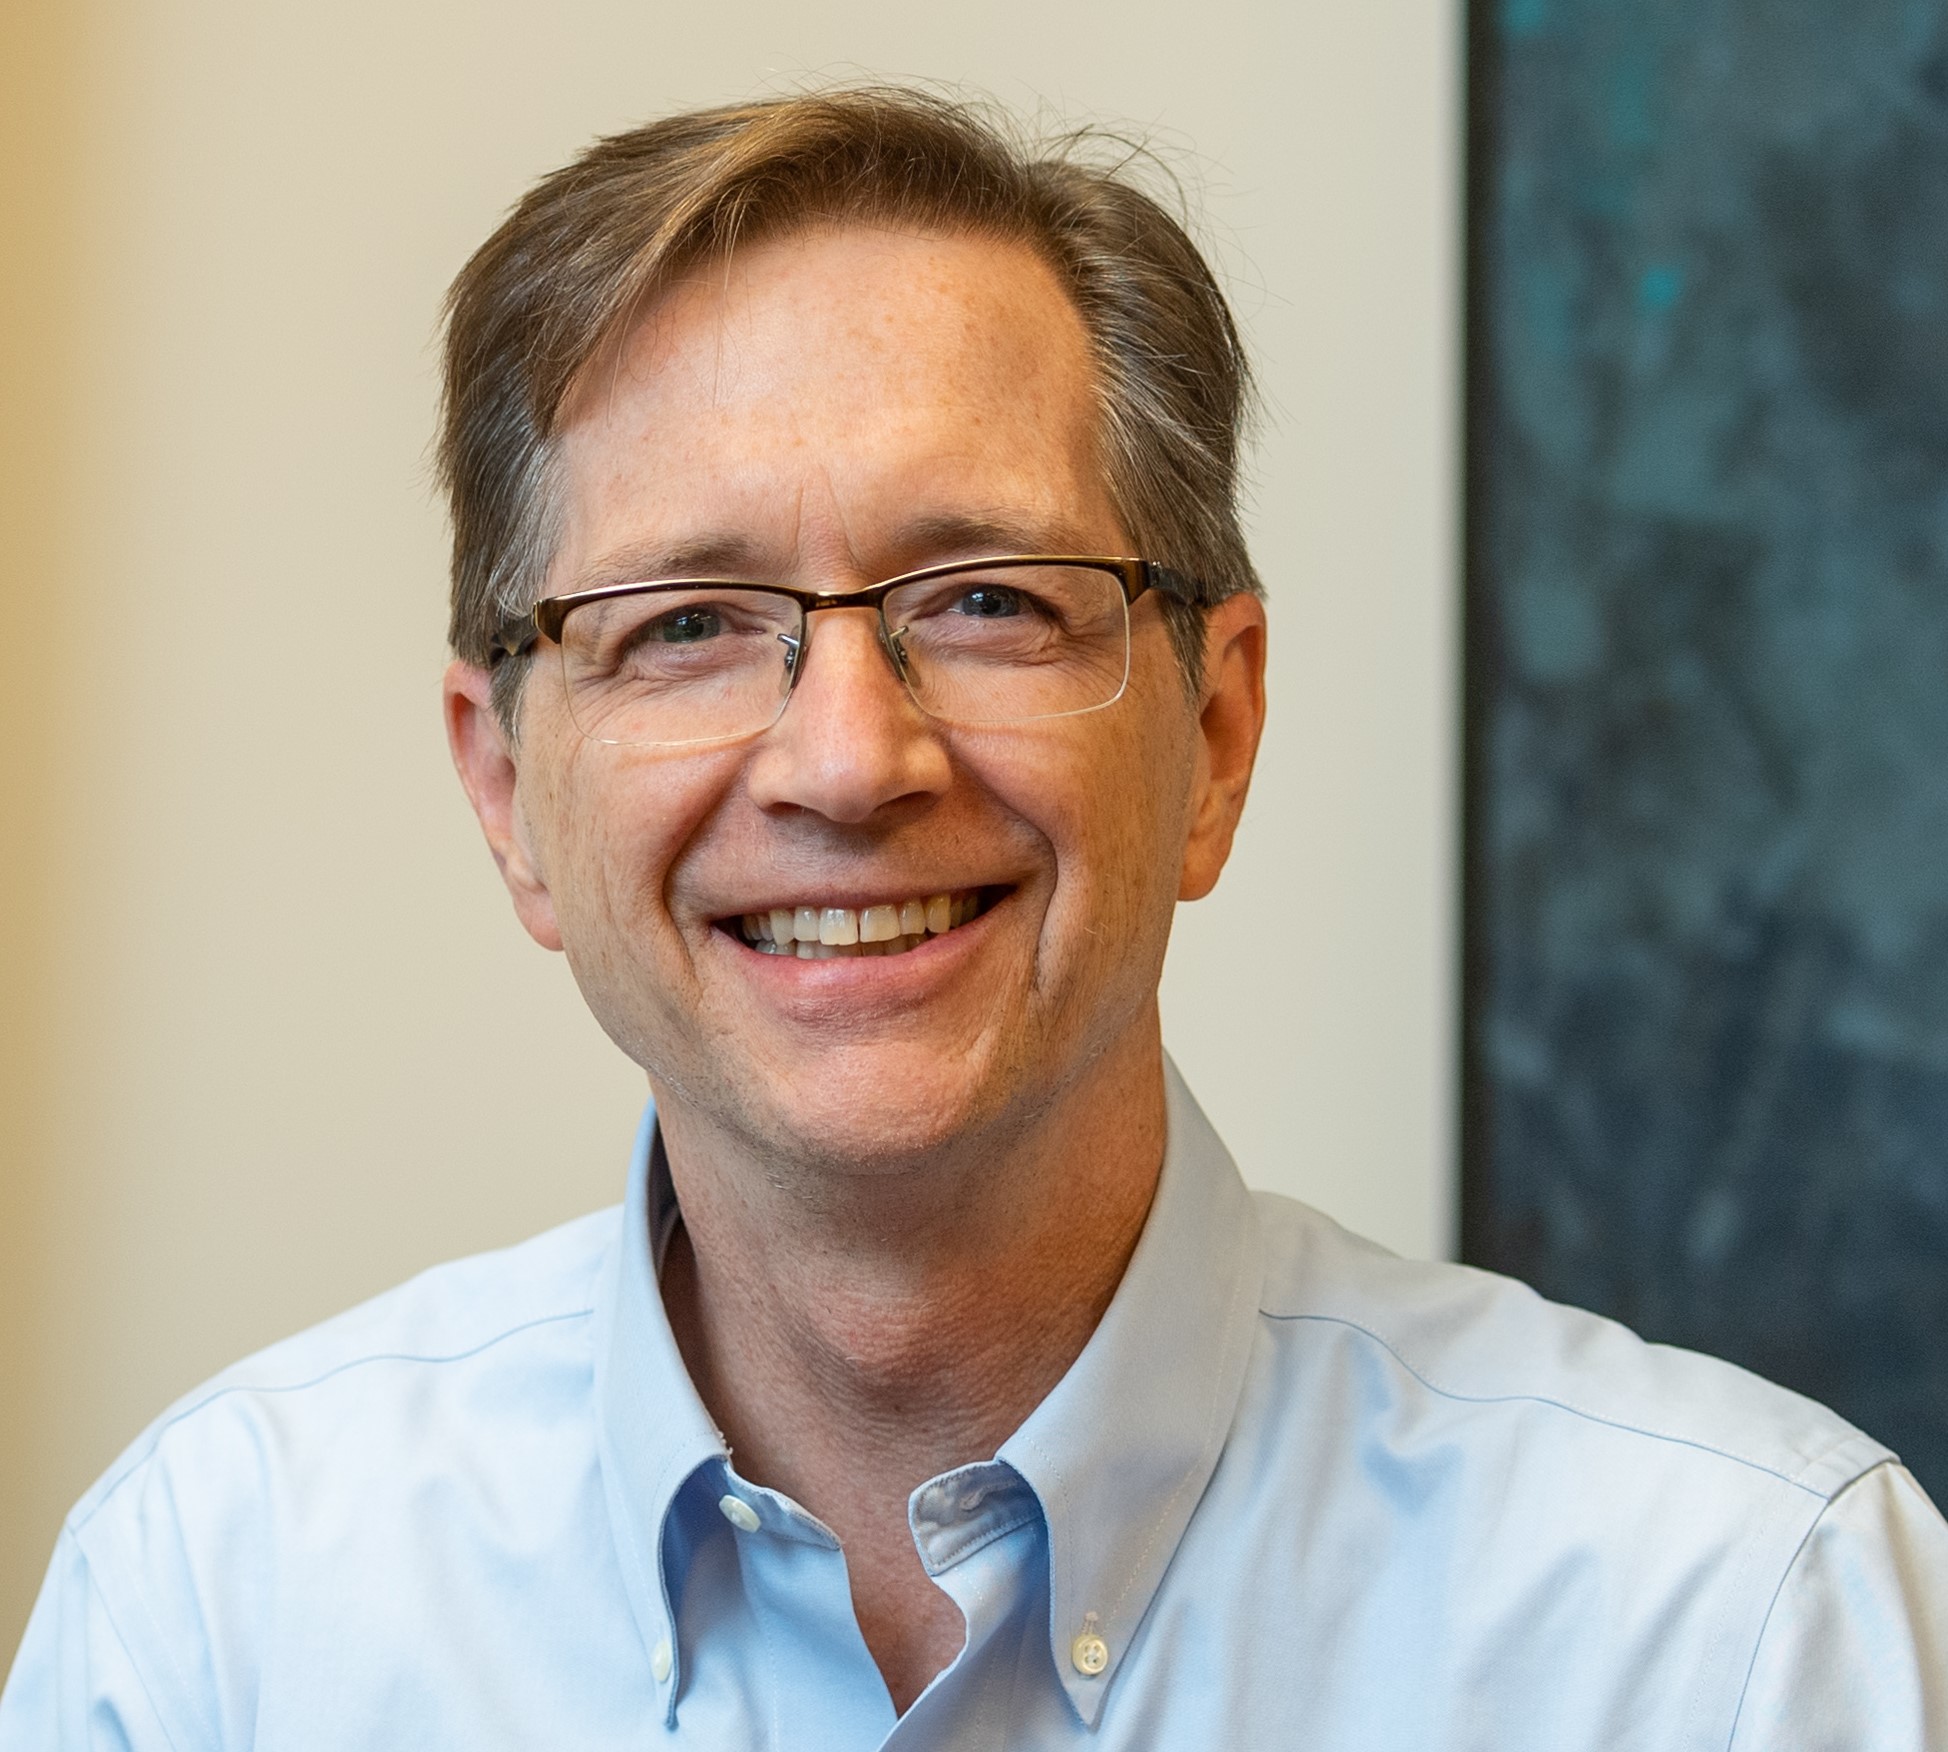 A headshot of smiling Robert T. Kennedy, PhD, Chair and Professor of Chemistry, Pharmacology and Macromolecular Science and Engineering, University of Michigan